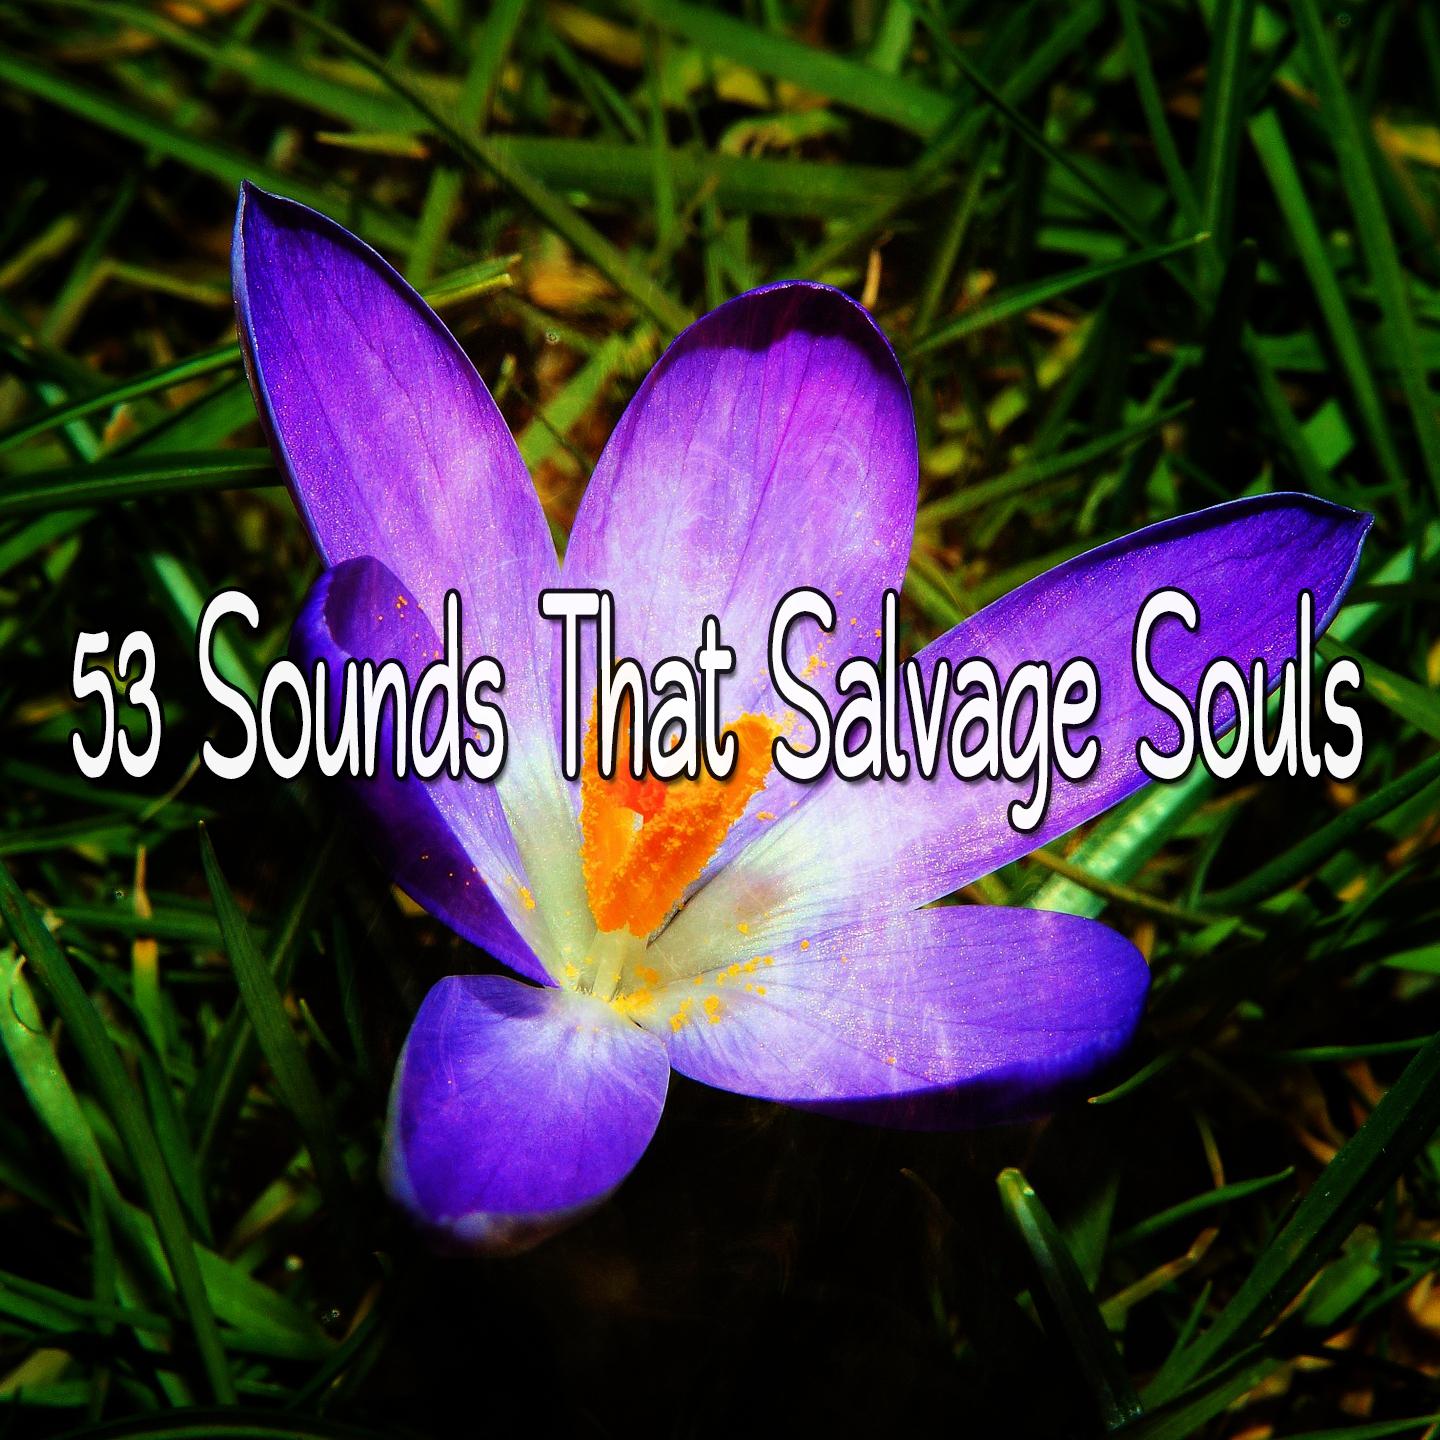 53 Sounds That Salvage Souls